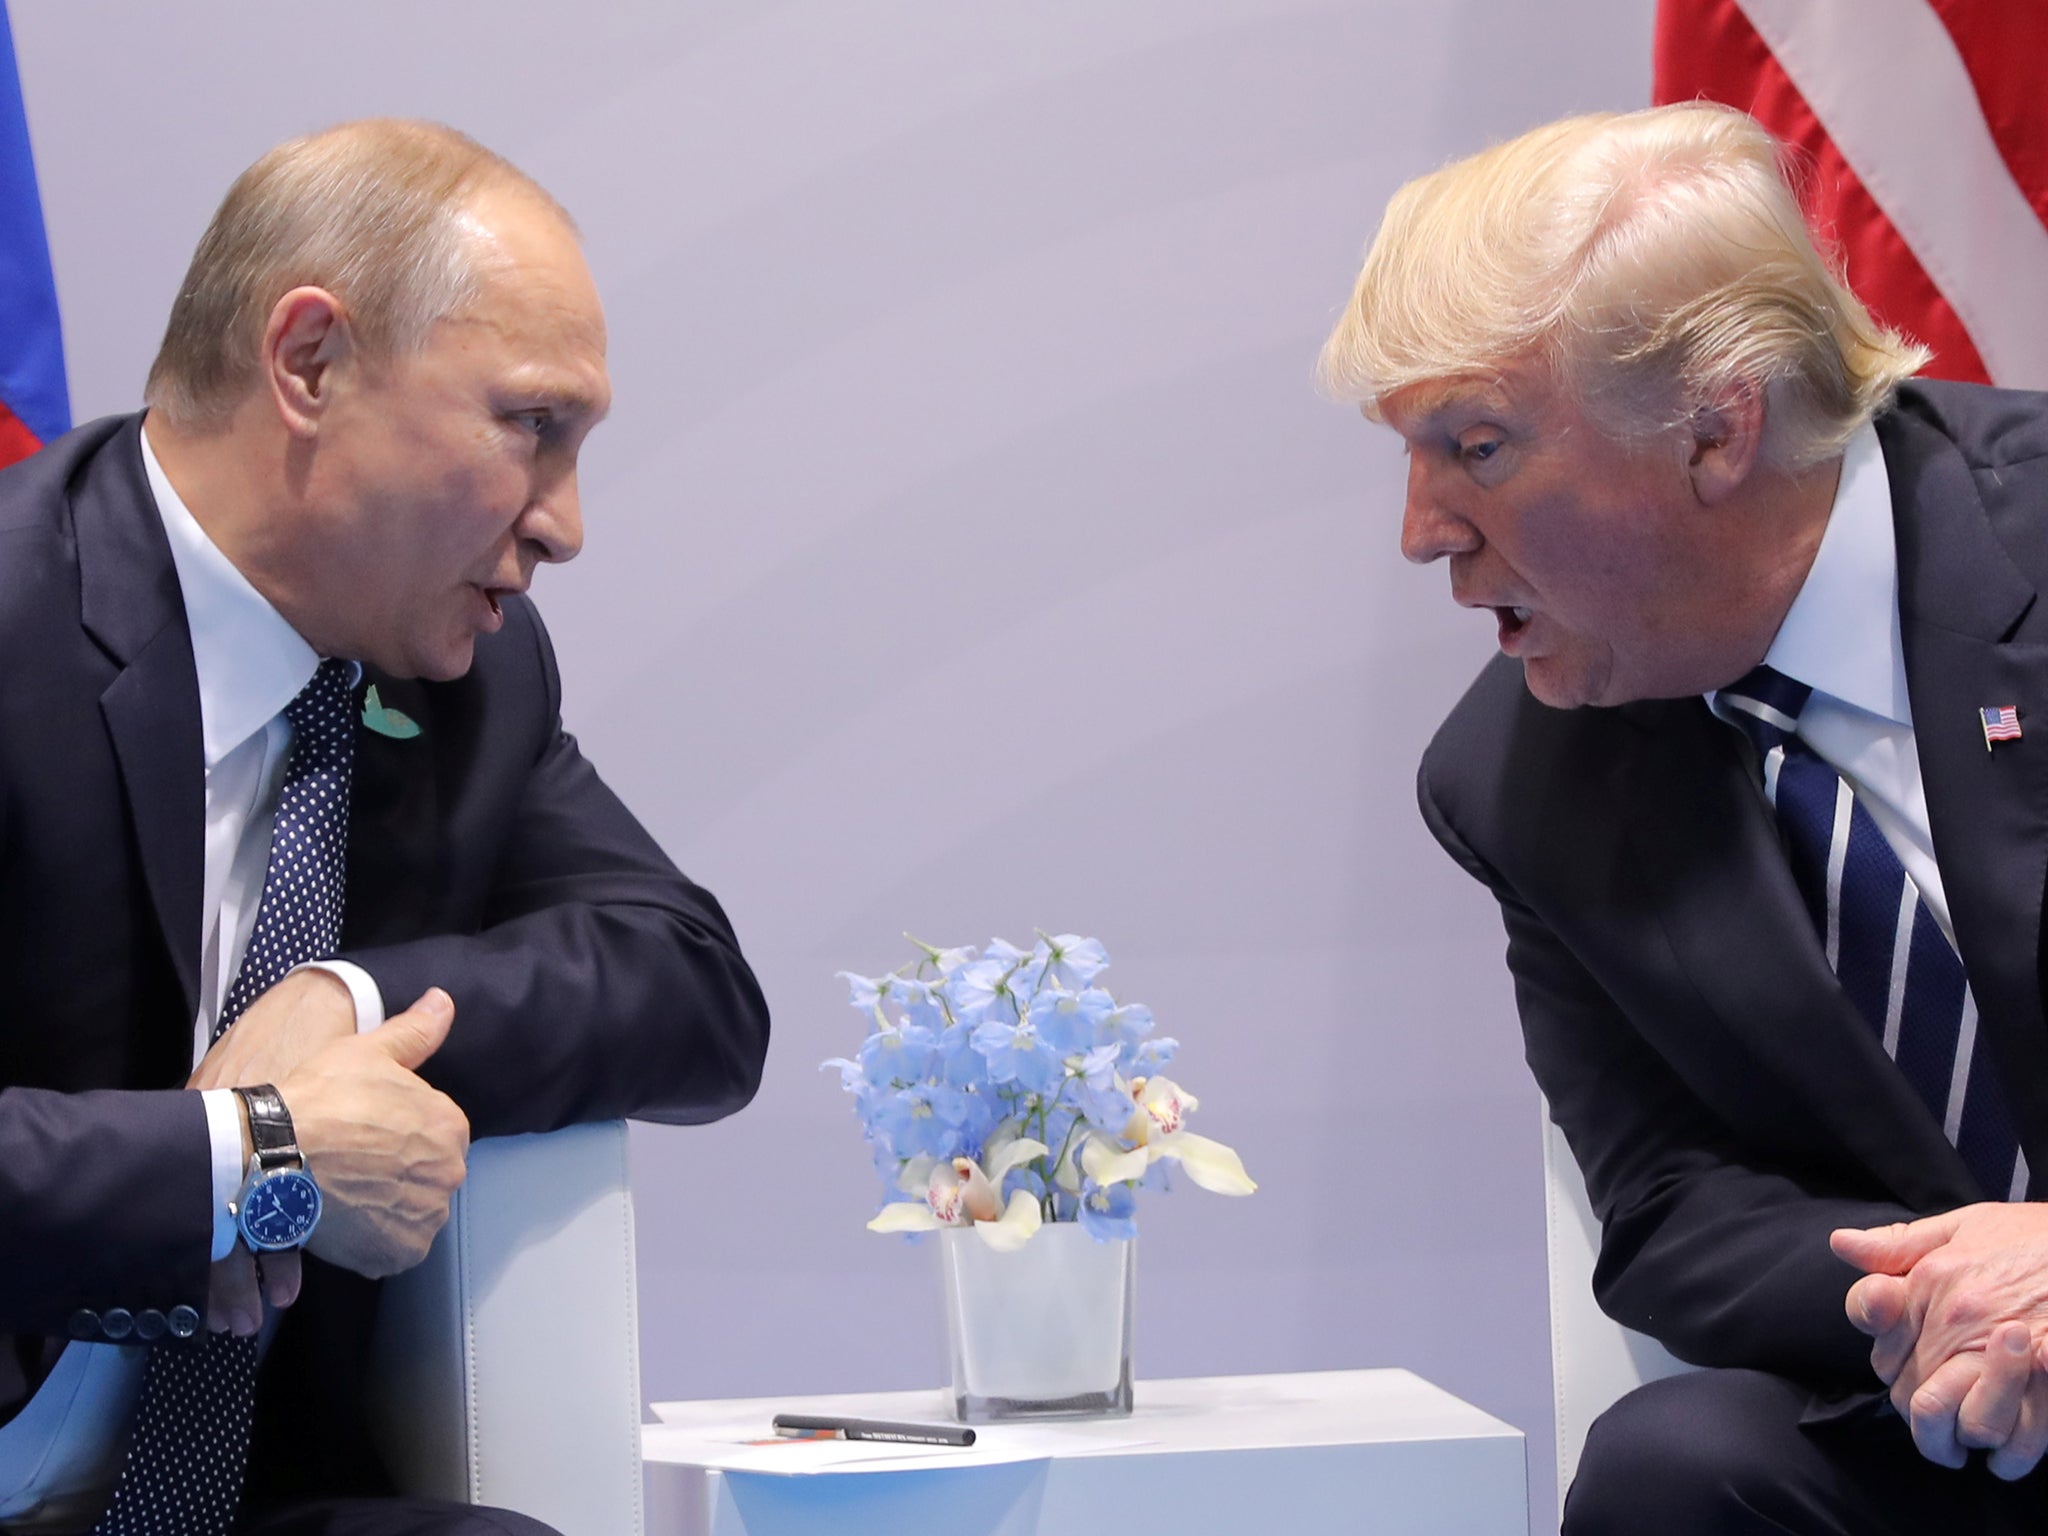 Mr Trump and Mr Putin met for the first time since the November election